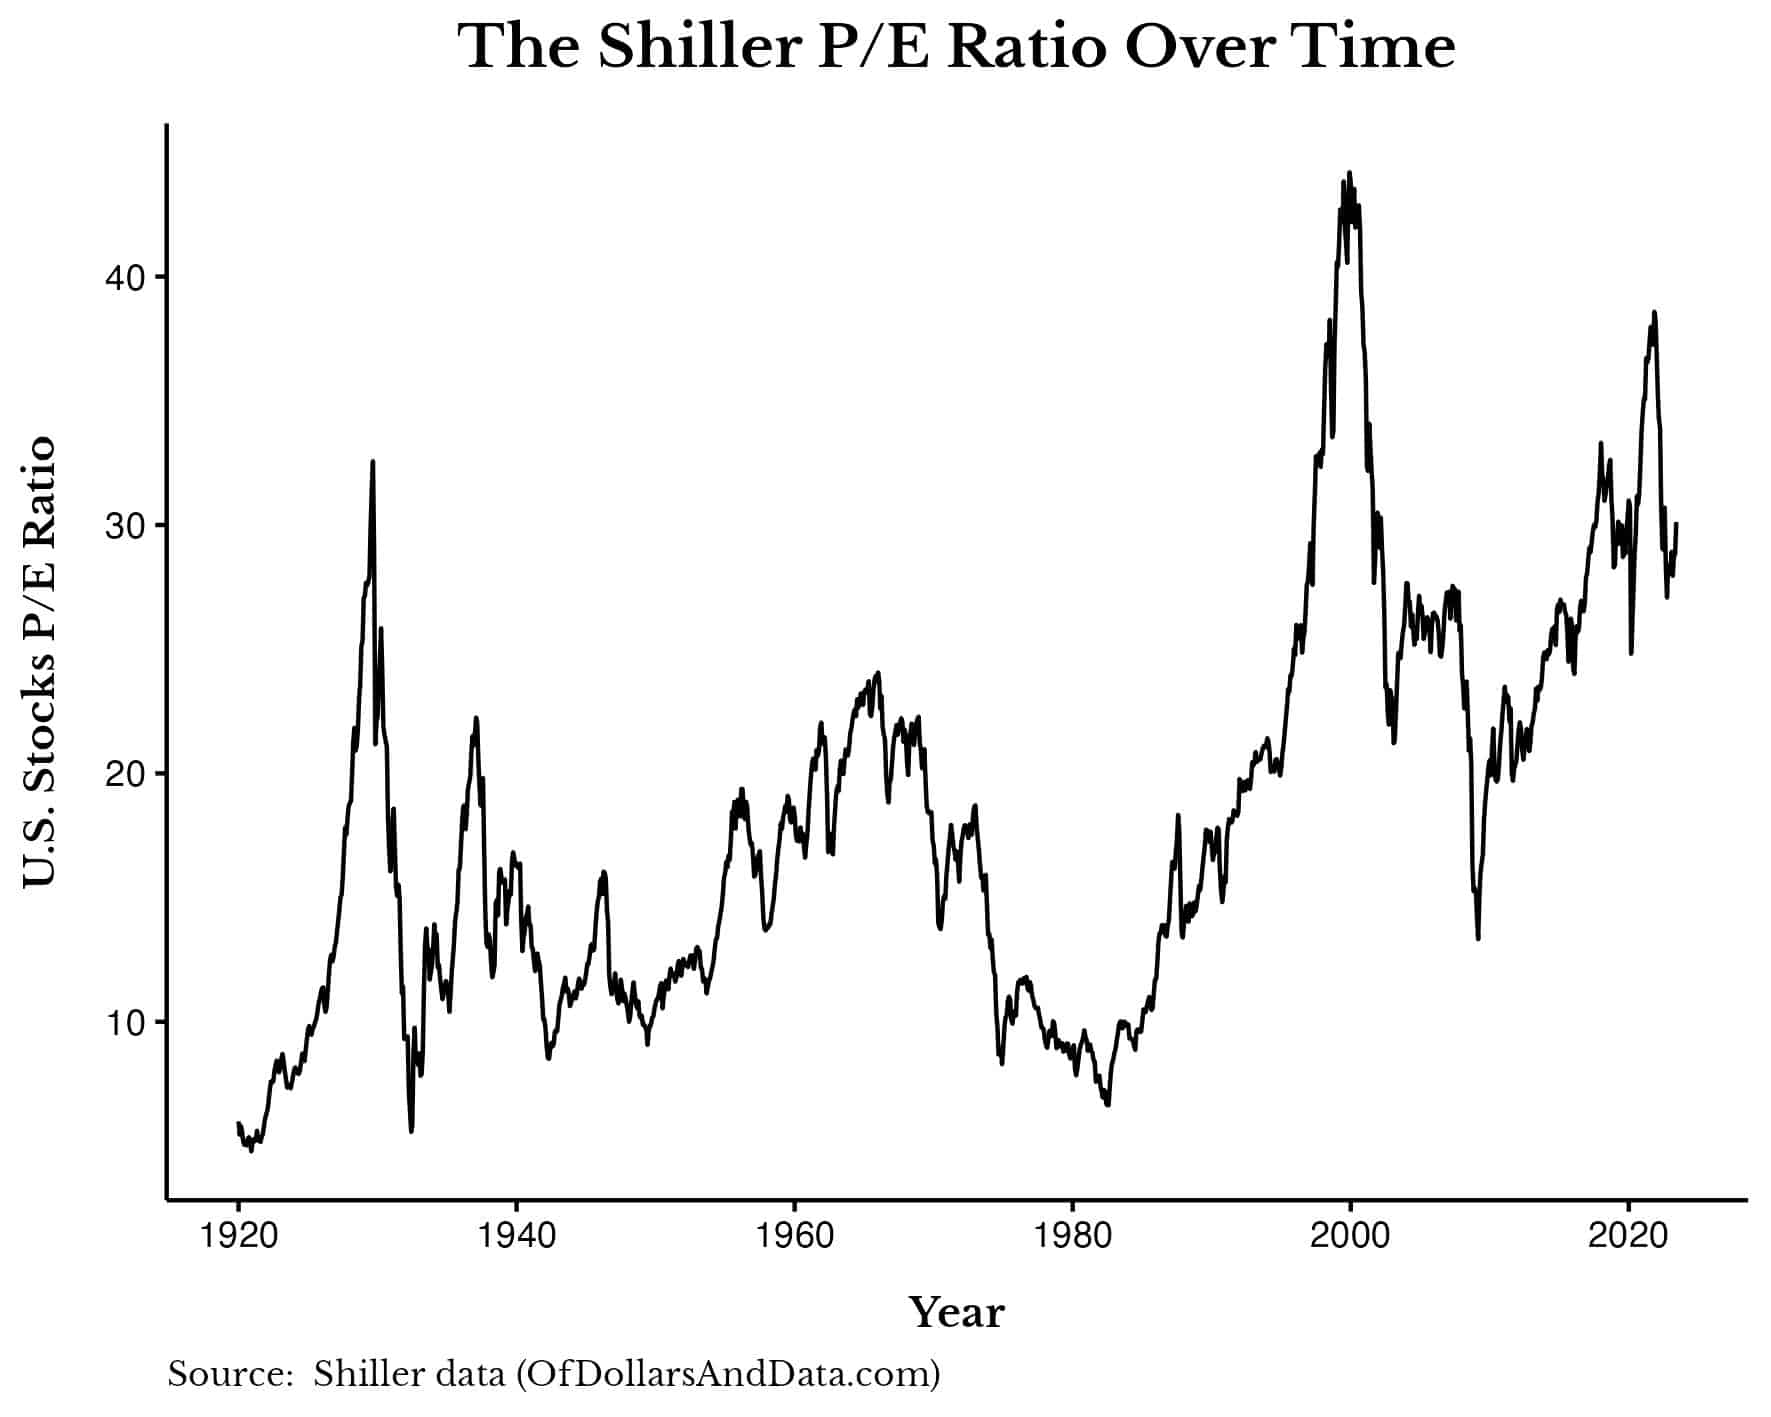 Chart of Shiller's P/E ratio over time.